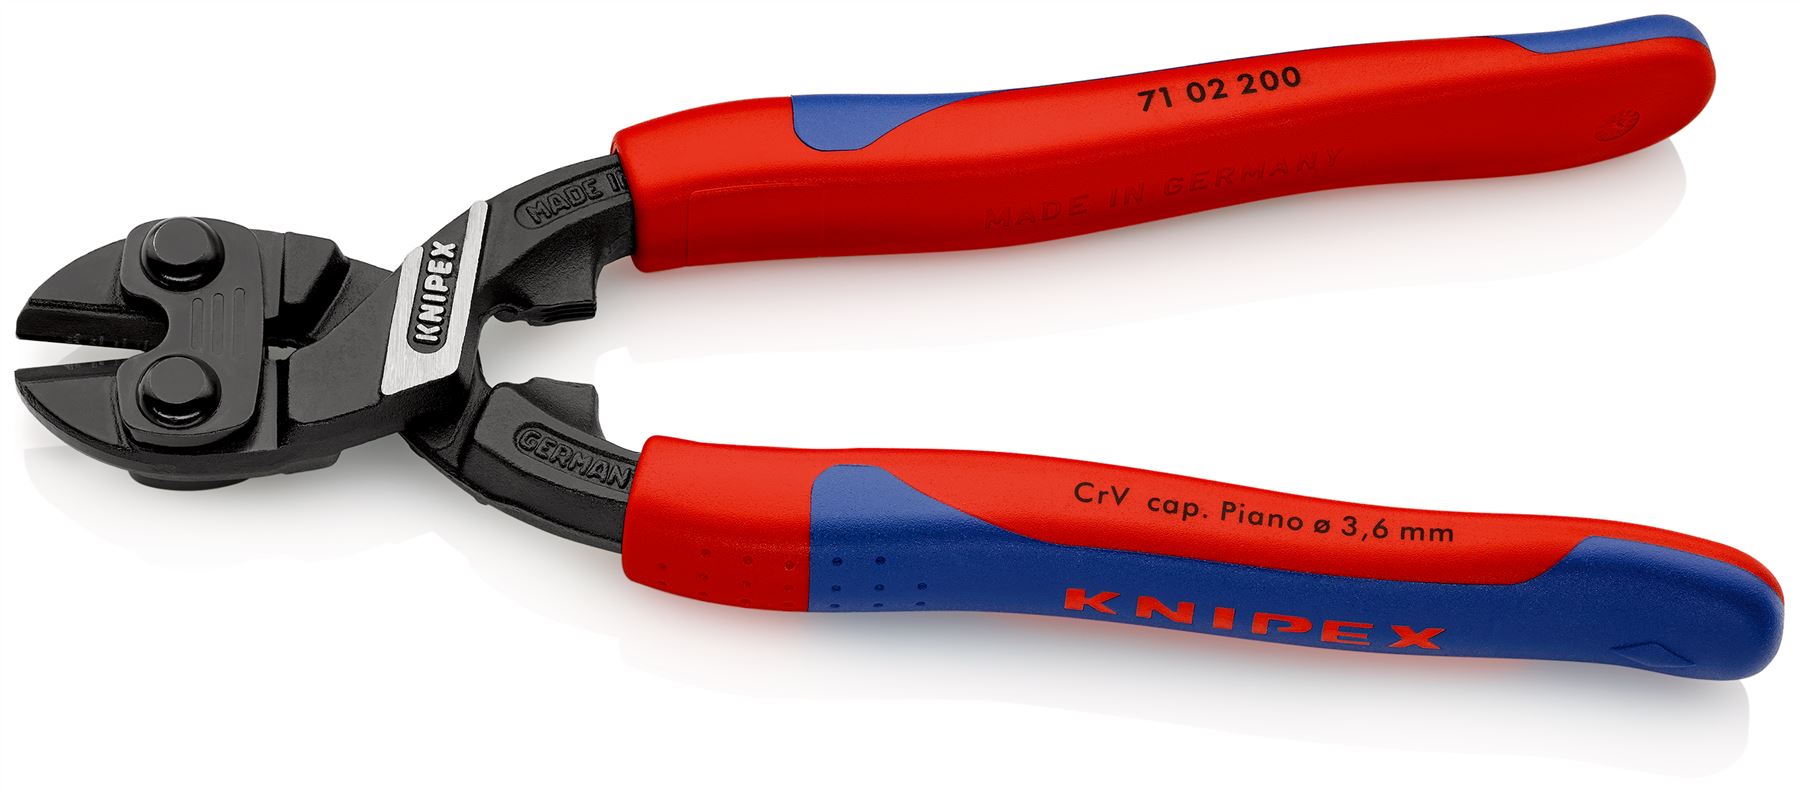 KNIPEX Compact Bolt Cutters CoBolt Cutting Pliers 200mm Multi Component Grips 71 02 200